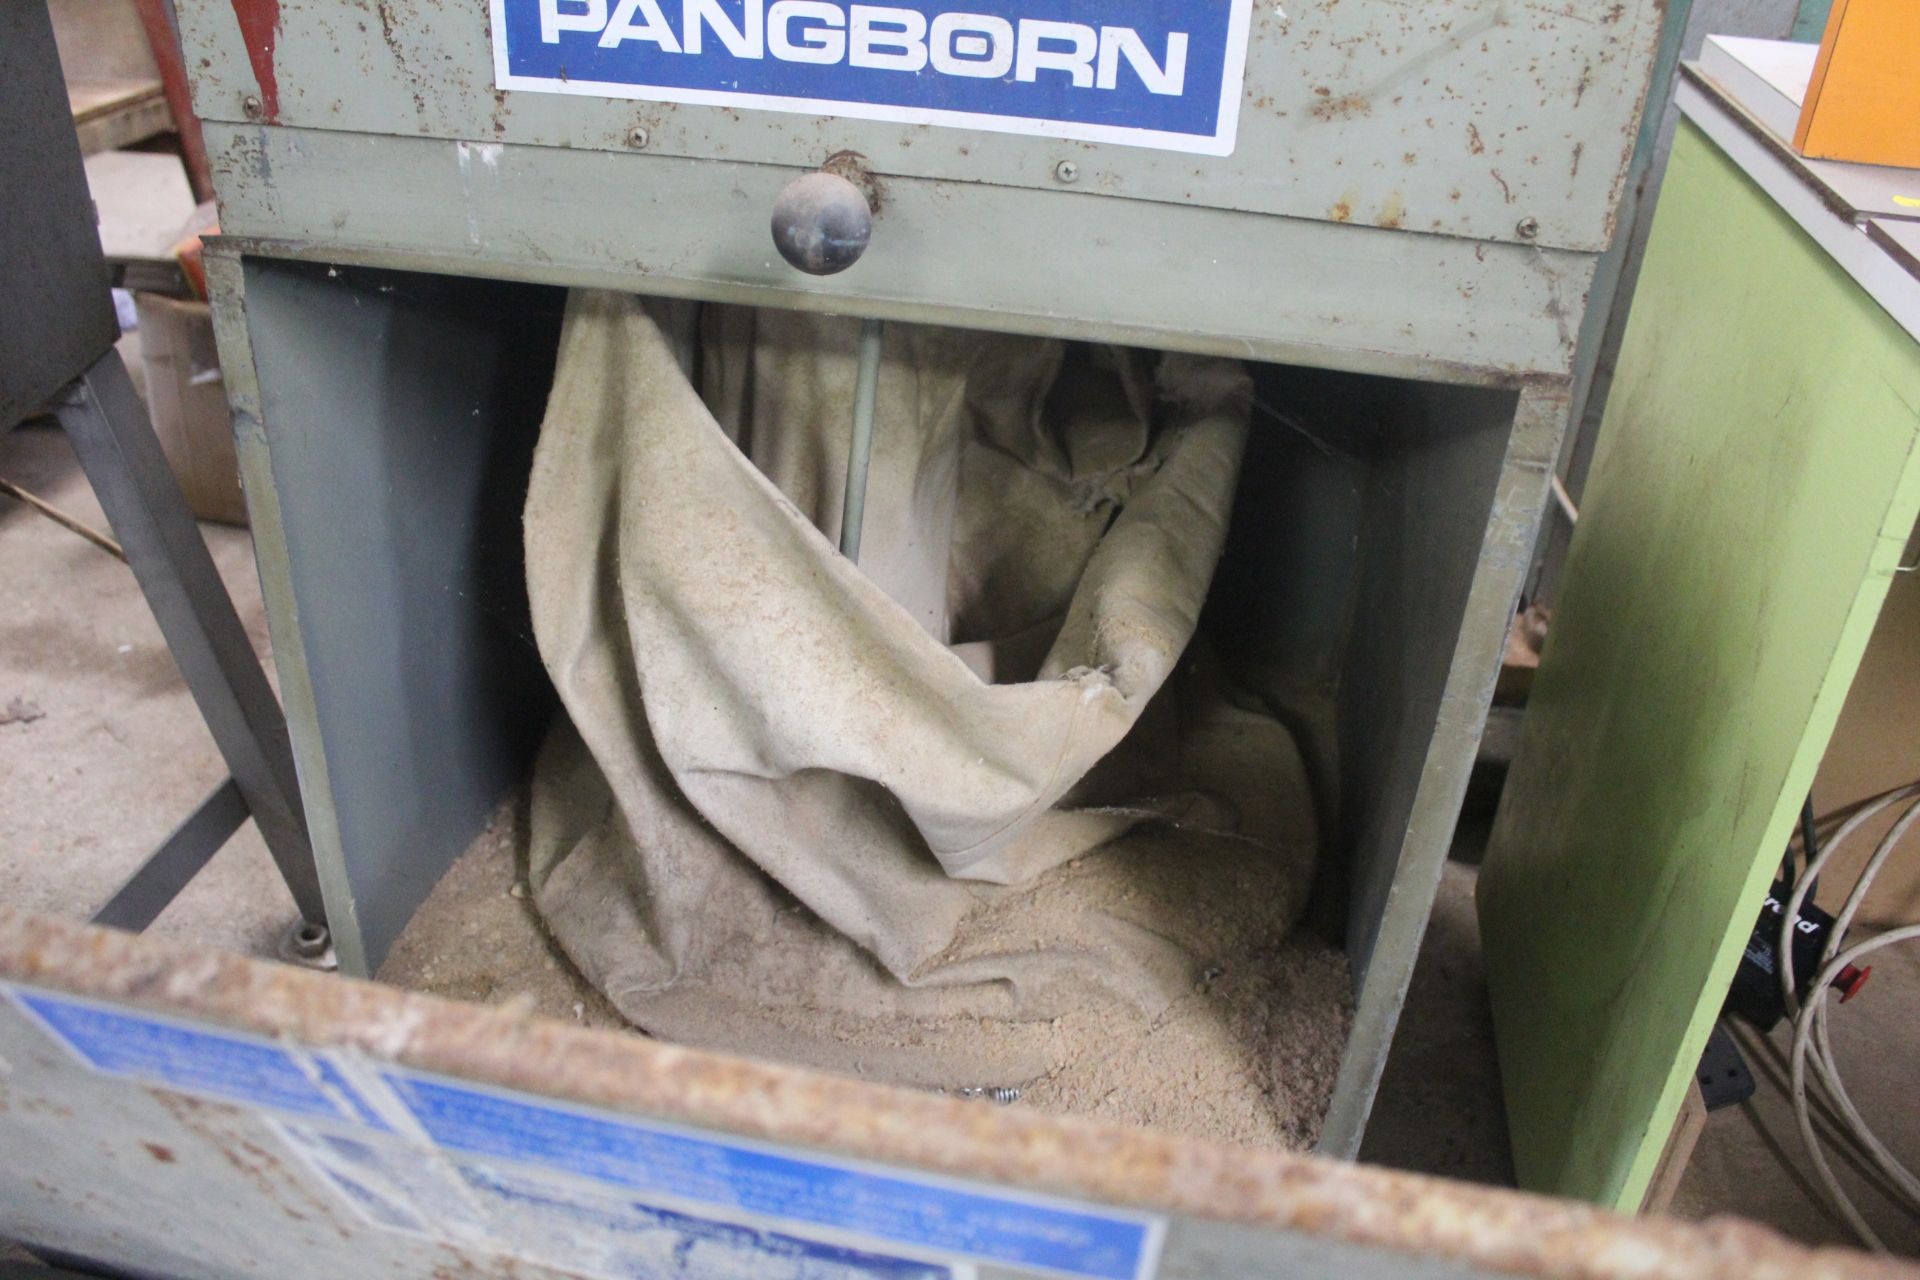 Pangborn fine particle dust extractor - Image 4 of 6